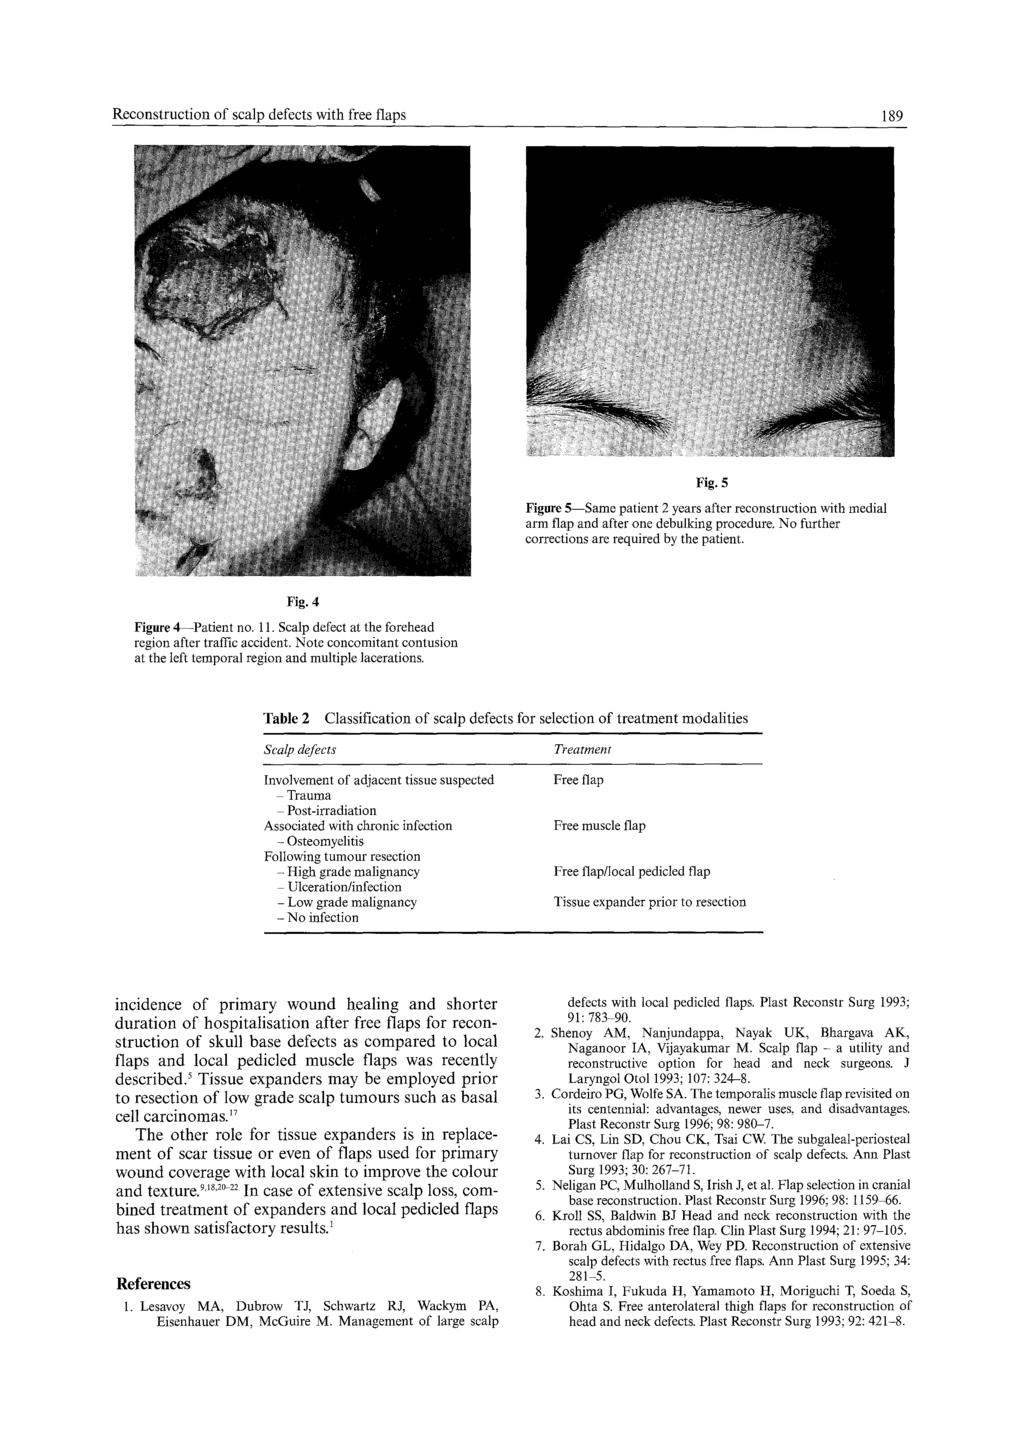 Reconstruction of scalp defects with free flaps 189 Fig. 5 Figure 5--Same patient 2 years after reconstruction with medial arm flap and after one debulking procedure.